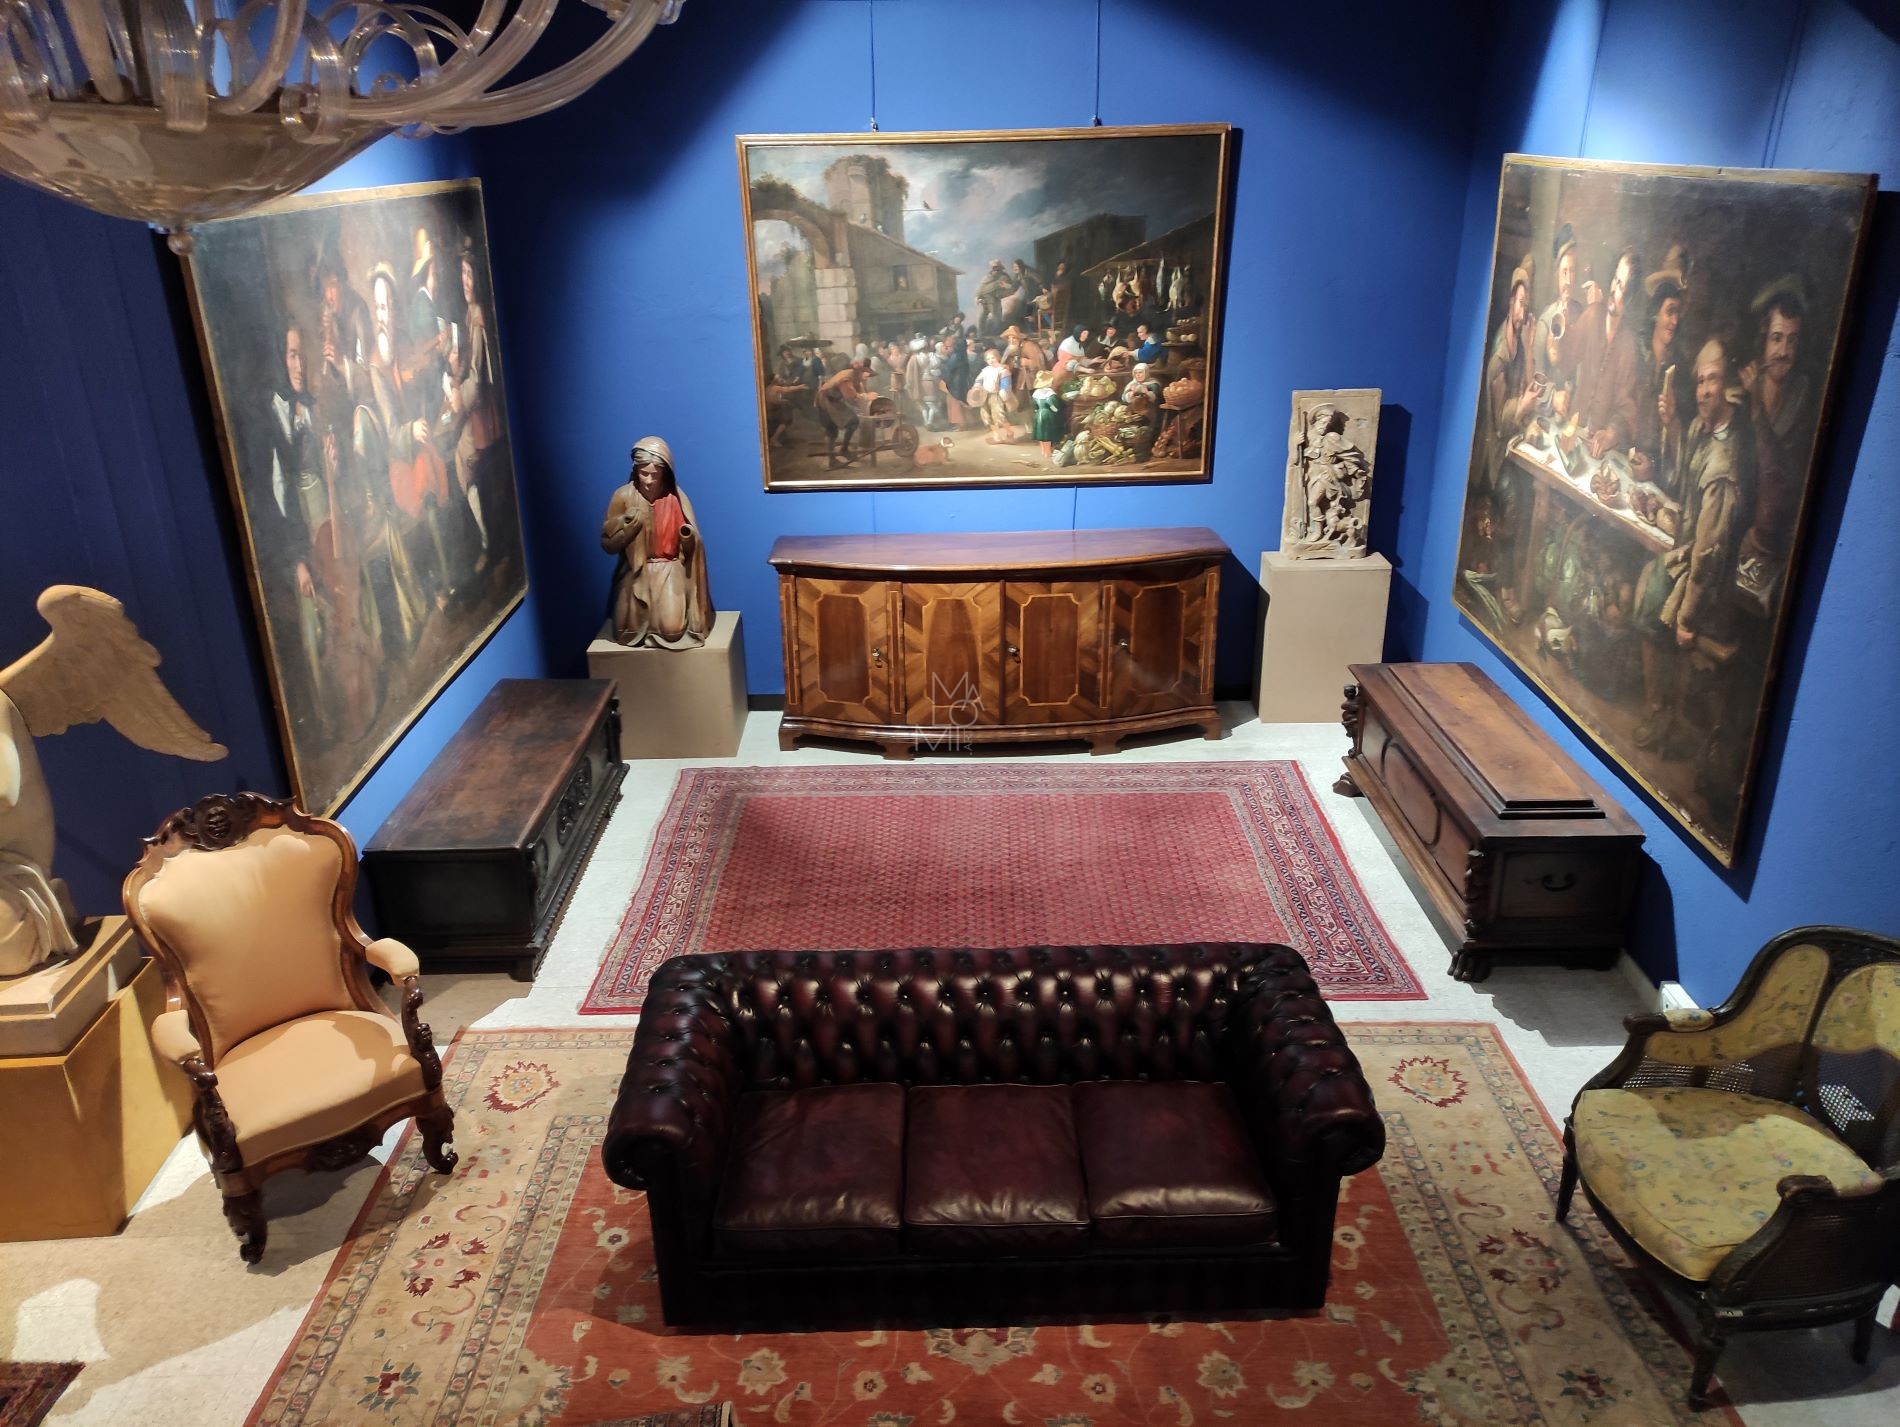 ... "combining passion and expertise in the evaluation of art and antiques"